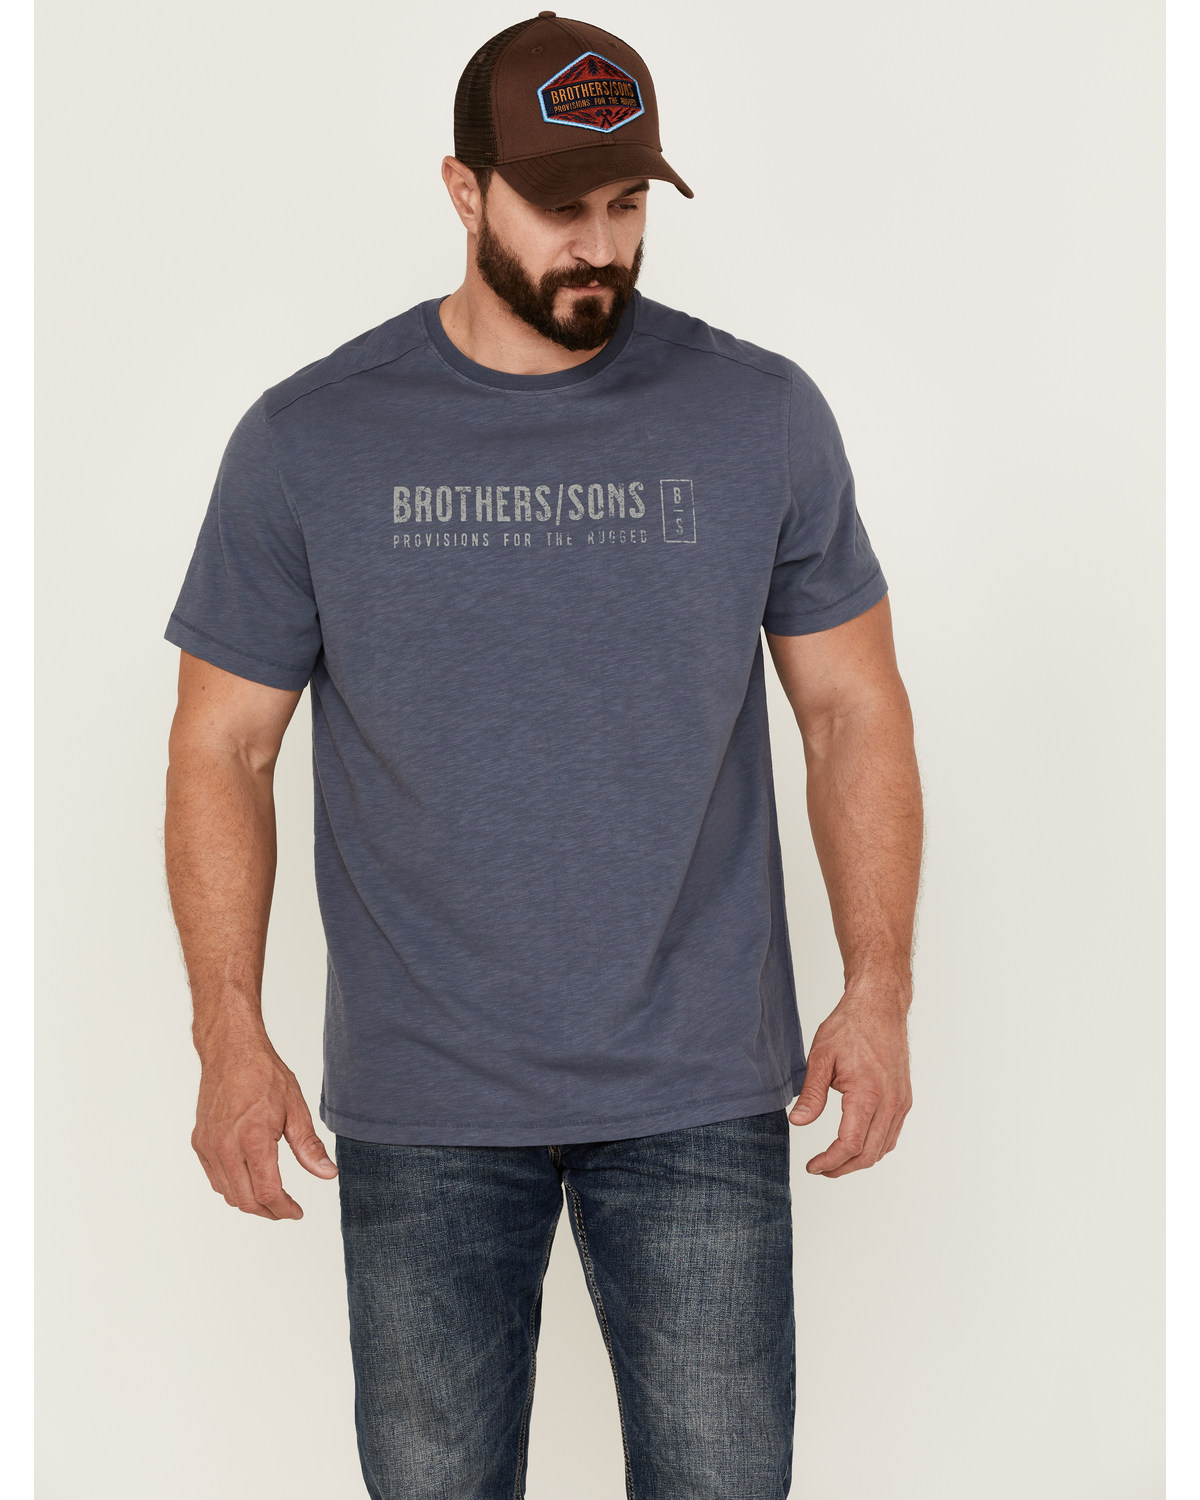 Brothers and Sons Men's Mercantile Weathered Slub Graphic Short Sleeve T-Shirt